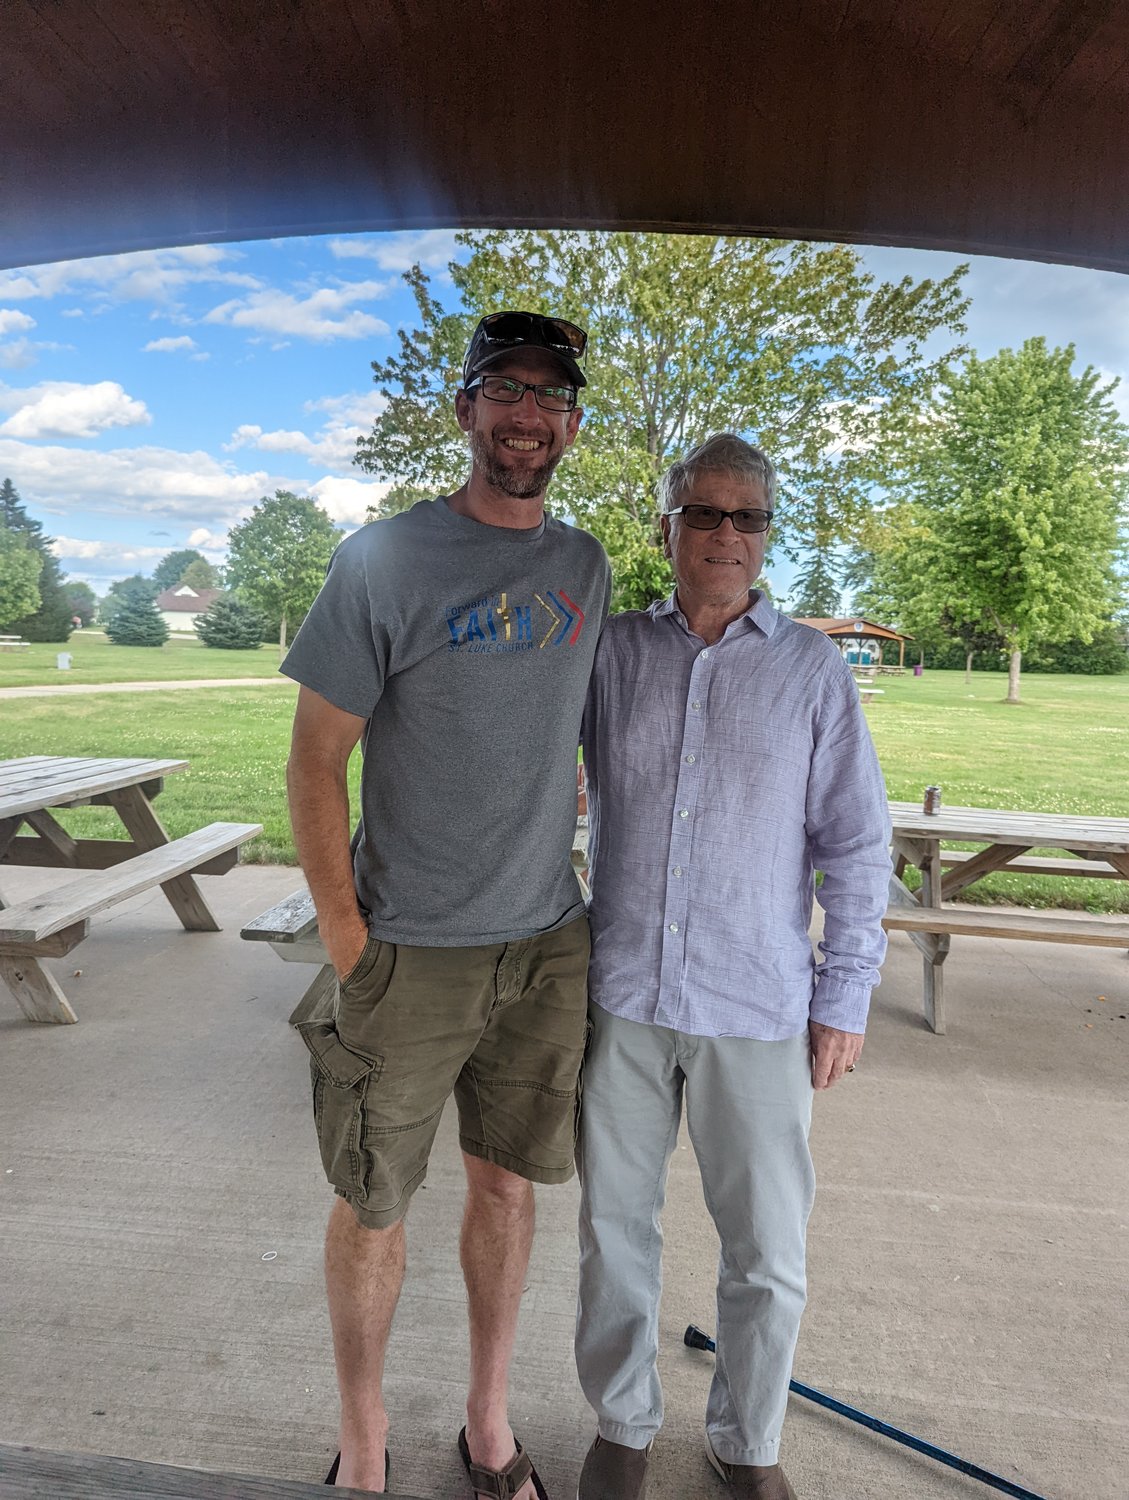 Current pastor, Eric Hanson (L) stands with former pastor, Ron Allen at St. Luke's 125th anniversary celebration held at Rosie Park July 24th.